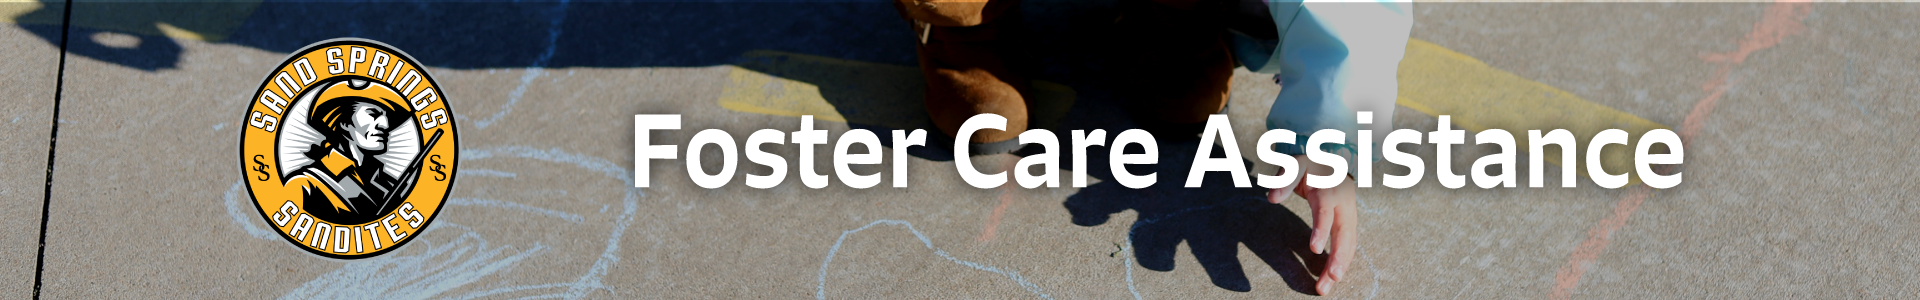 Foster Care Assistance